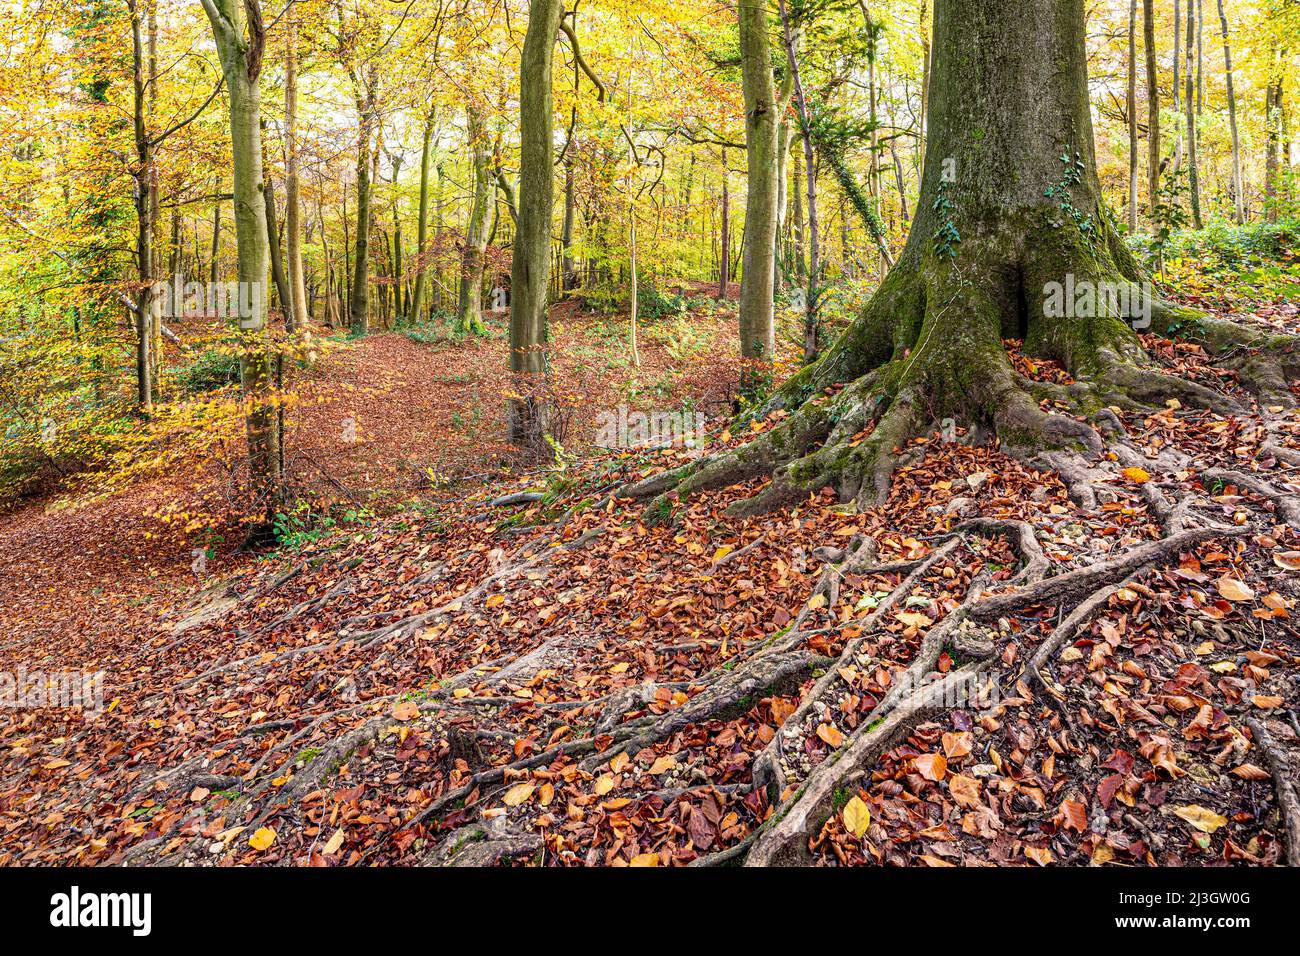 Autumn in the Cotswolds - The shallow roots of a beech tree in woodland on Kites Hill near Prinknash Abbey, Gloucestershire, England UK Stock Photo